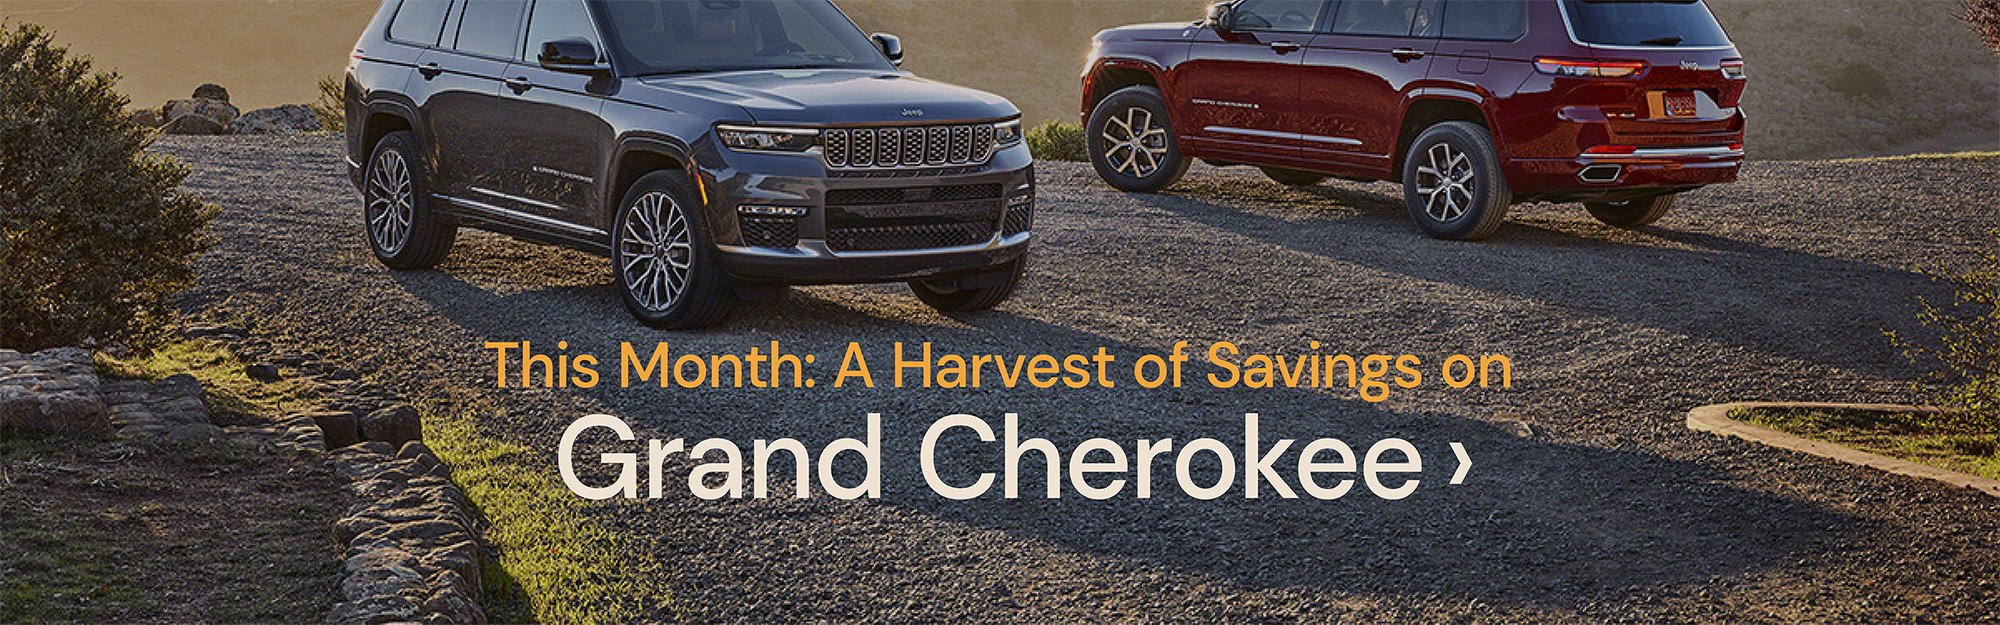 Jeep Deals This Month